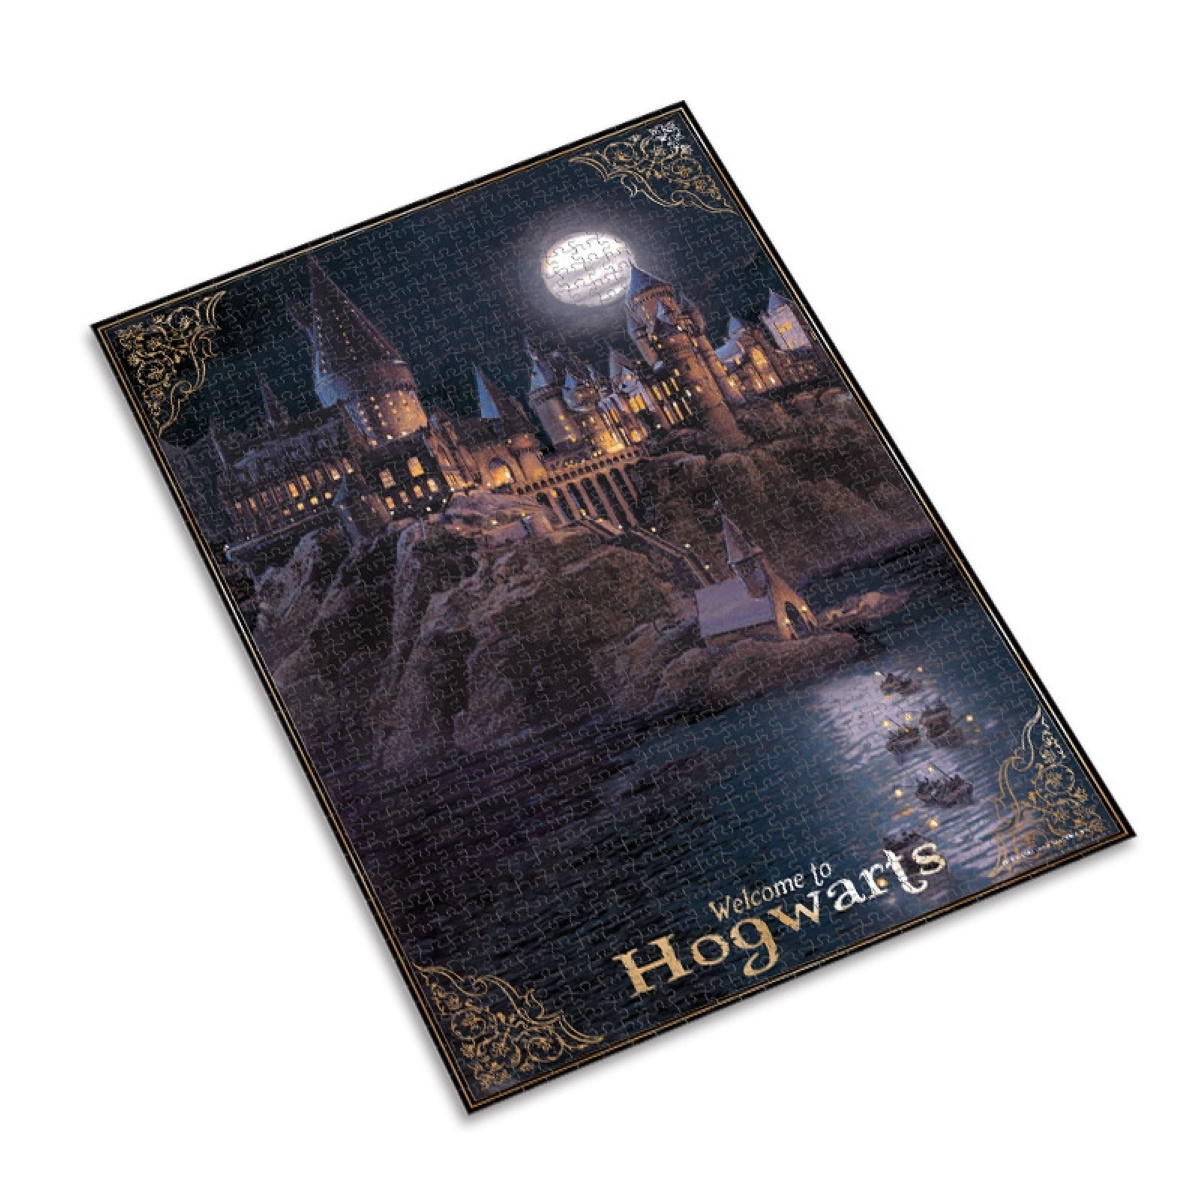 Hogwarts ABYSTYLE Schloss Teile Puzzle 1000 Puzzle